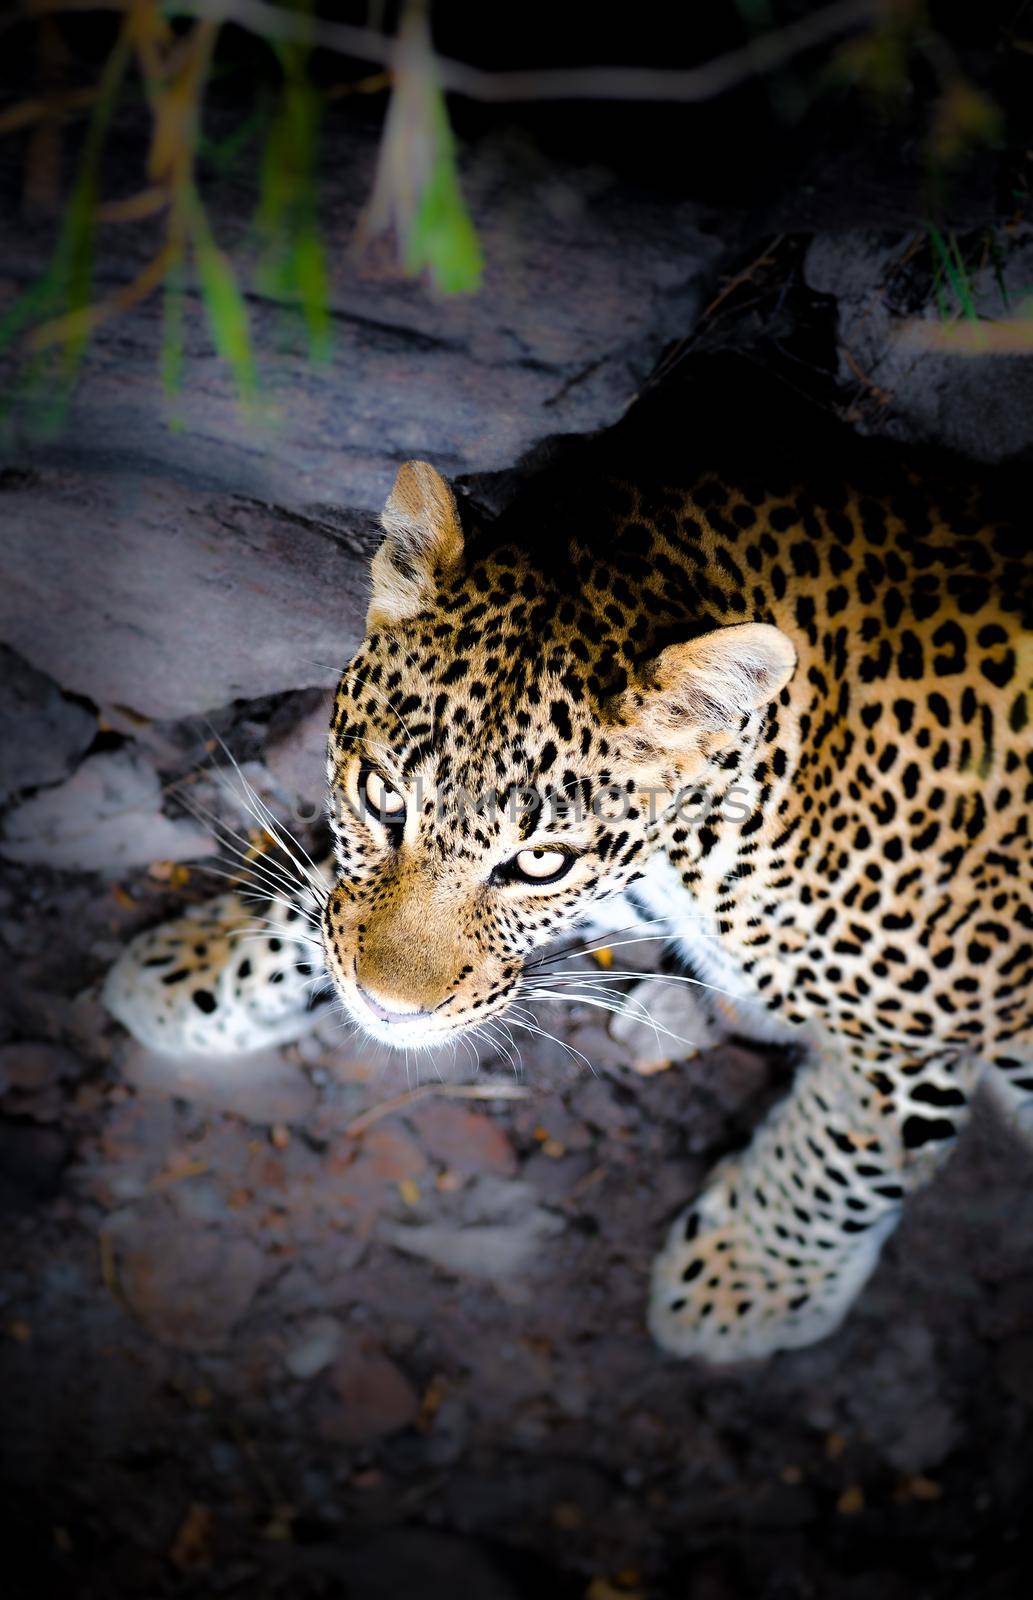 Leopard live in sub-Saharan Africa, northeast Africa, Central Asia, India